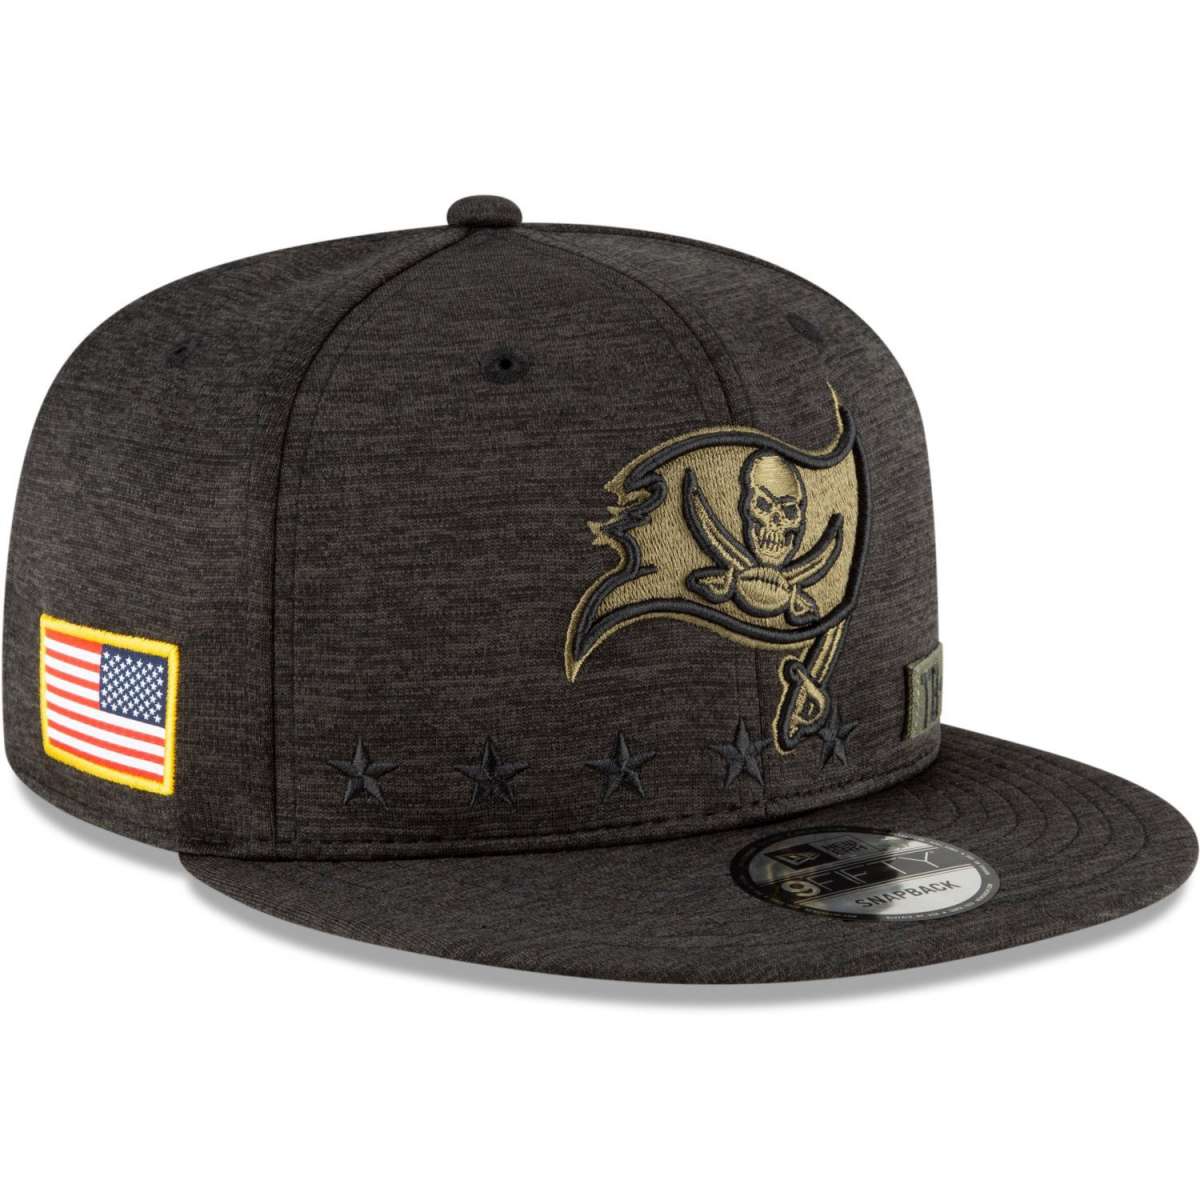 New Era 9FIFTY Cap Salute to Service Tampa Bay Buccaneers | Snapback ...